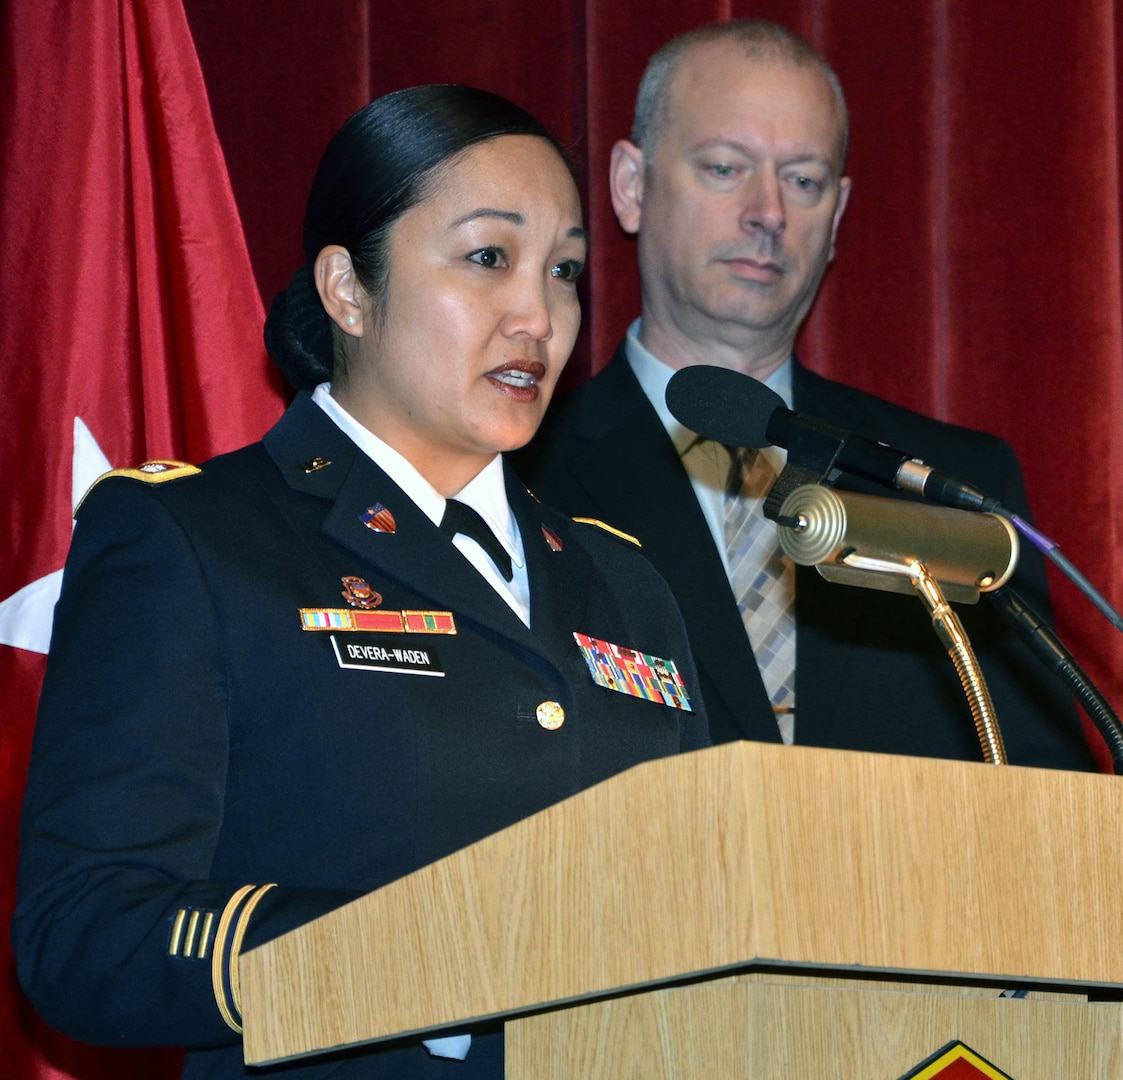 Lt. Col. Daryl Devera-Waden reads the Martin Luther King Jr. Day presidential proclamation Jan. 17 during the 2018 Joint Base San Antonio-Fort Sam Houston Martin Luther King Jr. Day observance at the JBSA-Fort Sam Houston Theater. Devera-Waden is the deputy chief of staff for operations and security for the Mission and Installation Contracting Command at JBSA-Fort Sam Houston.